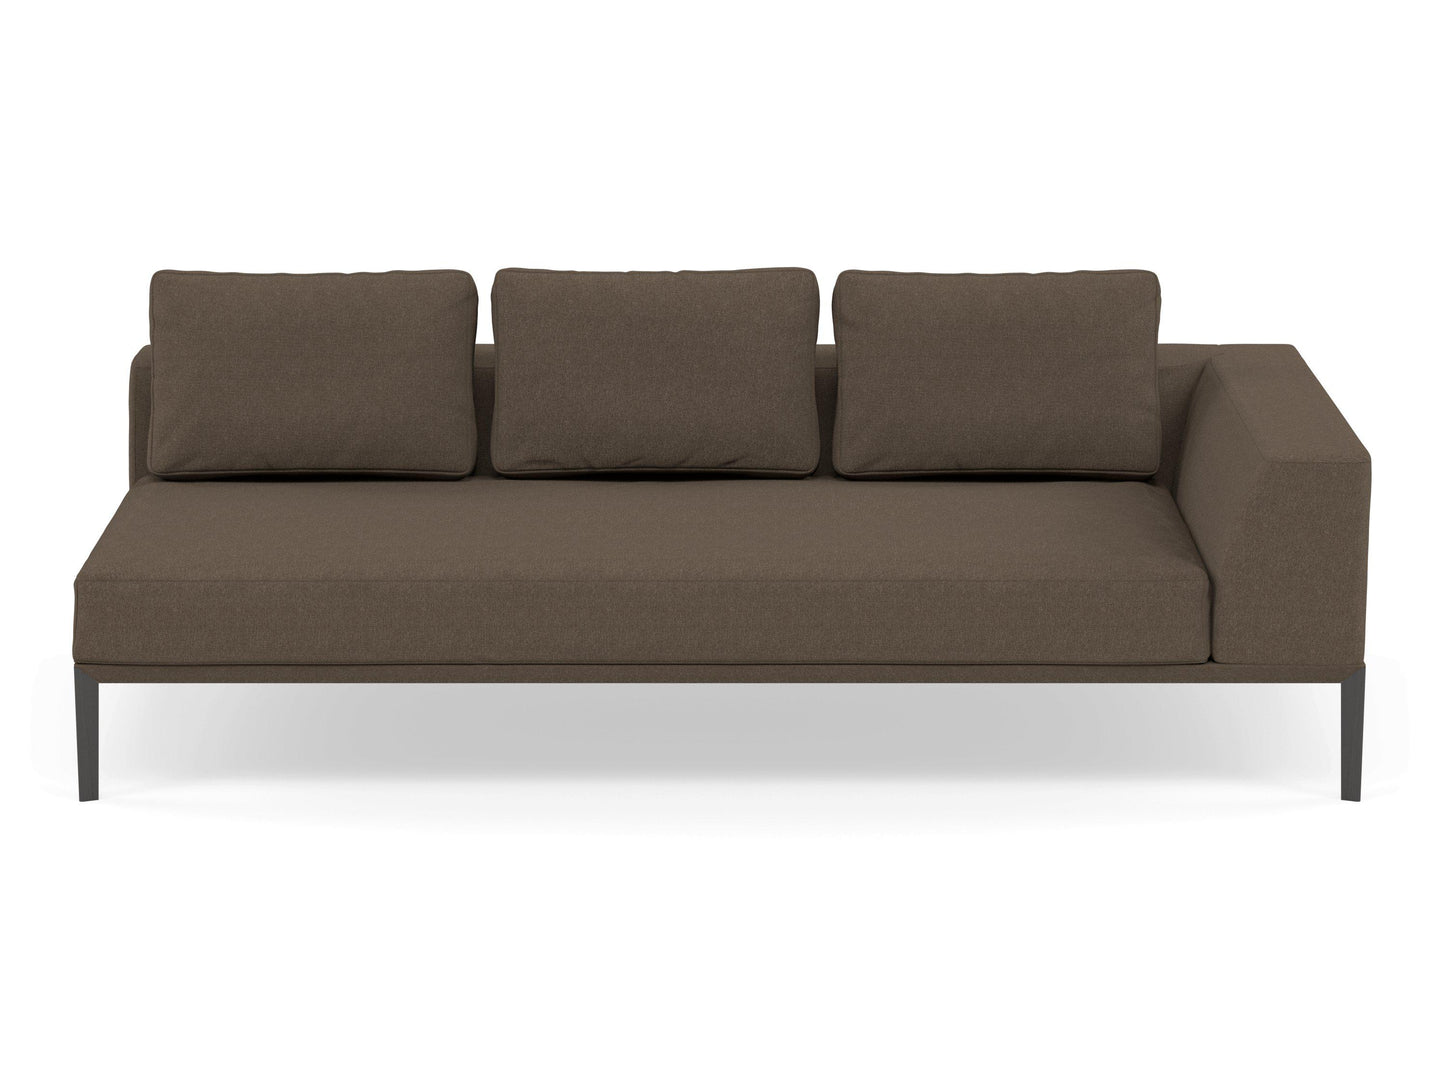 Modern 3 Seater Chaise Lounge Style Sofa with Left Armrest in Coffee Brown Fabric-Wenge Oak-Distinct Designs (London) Ltd